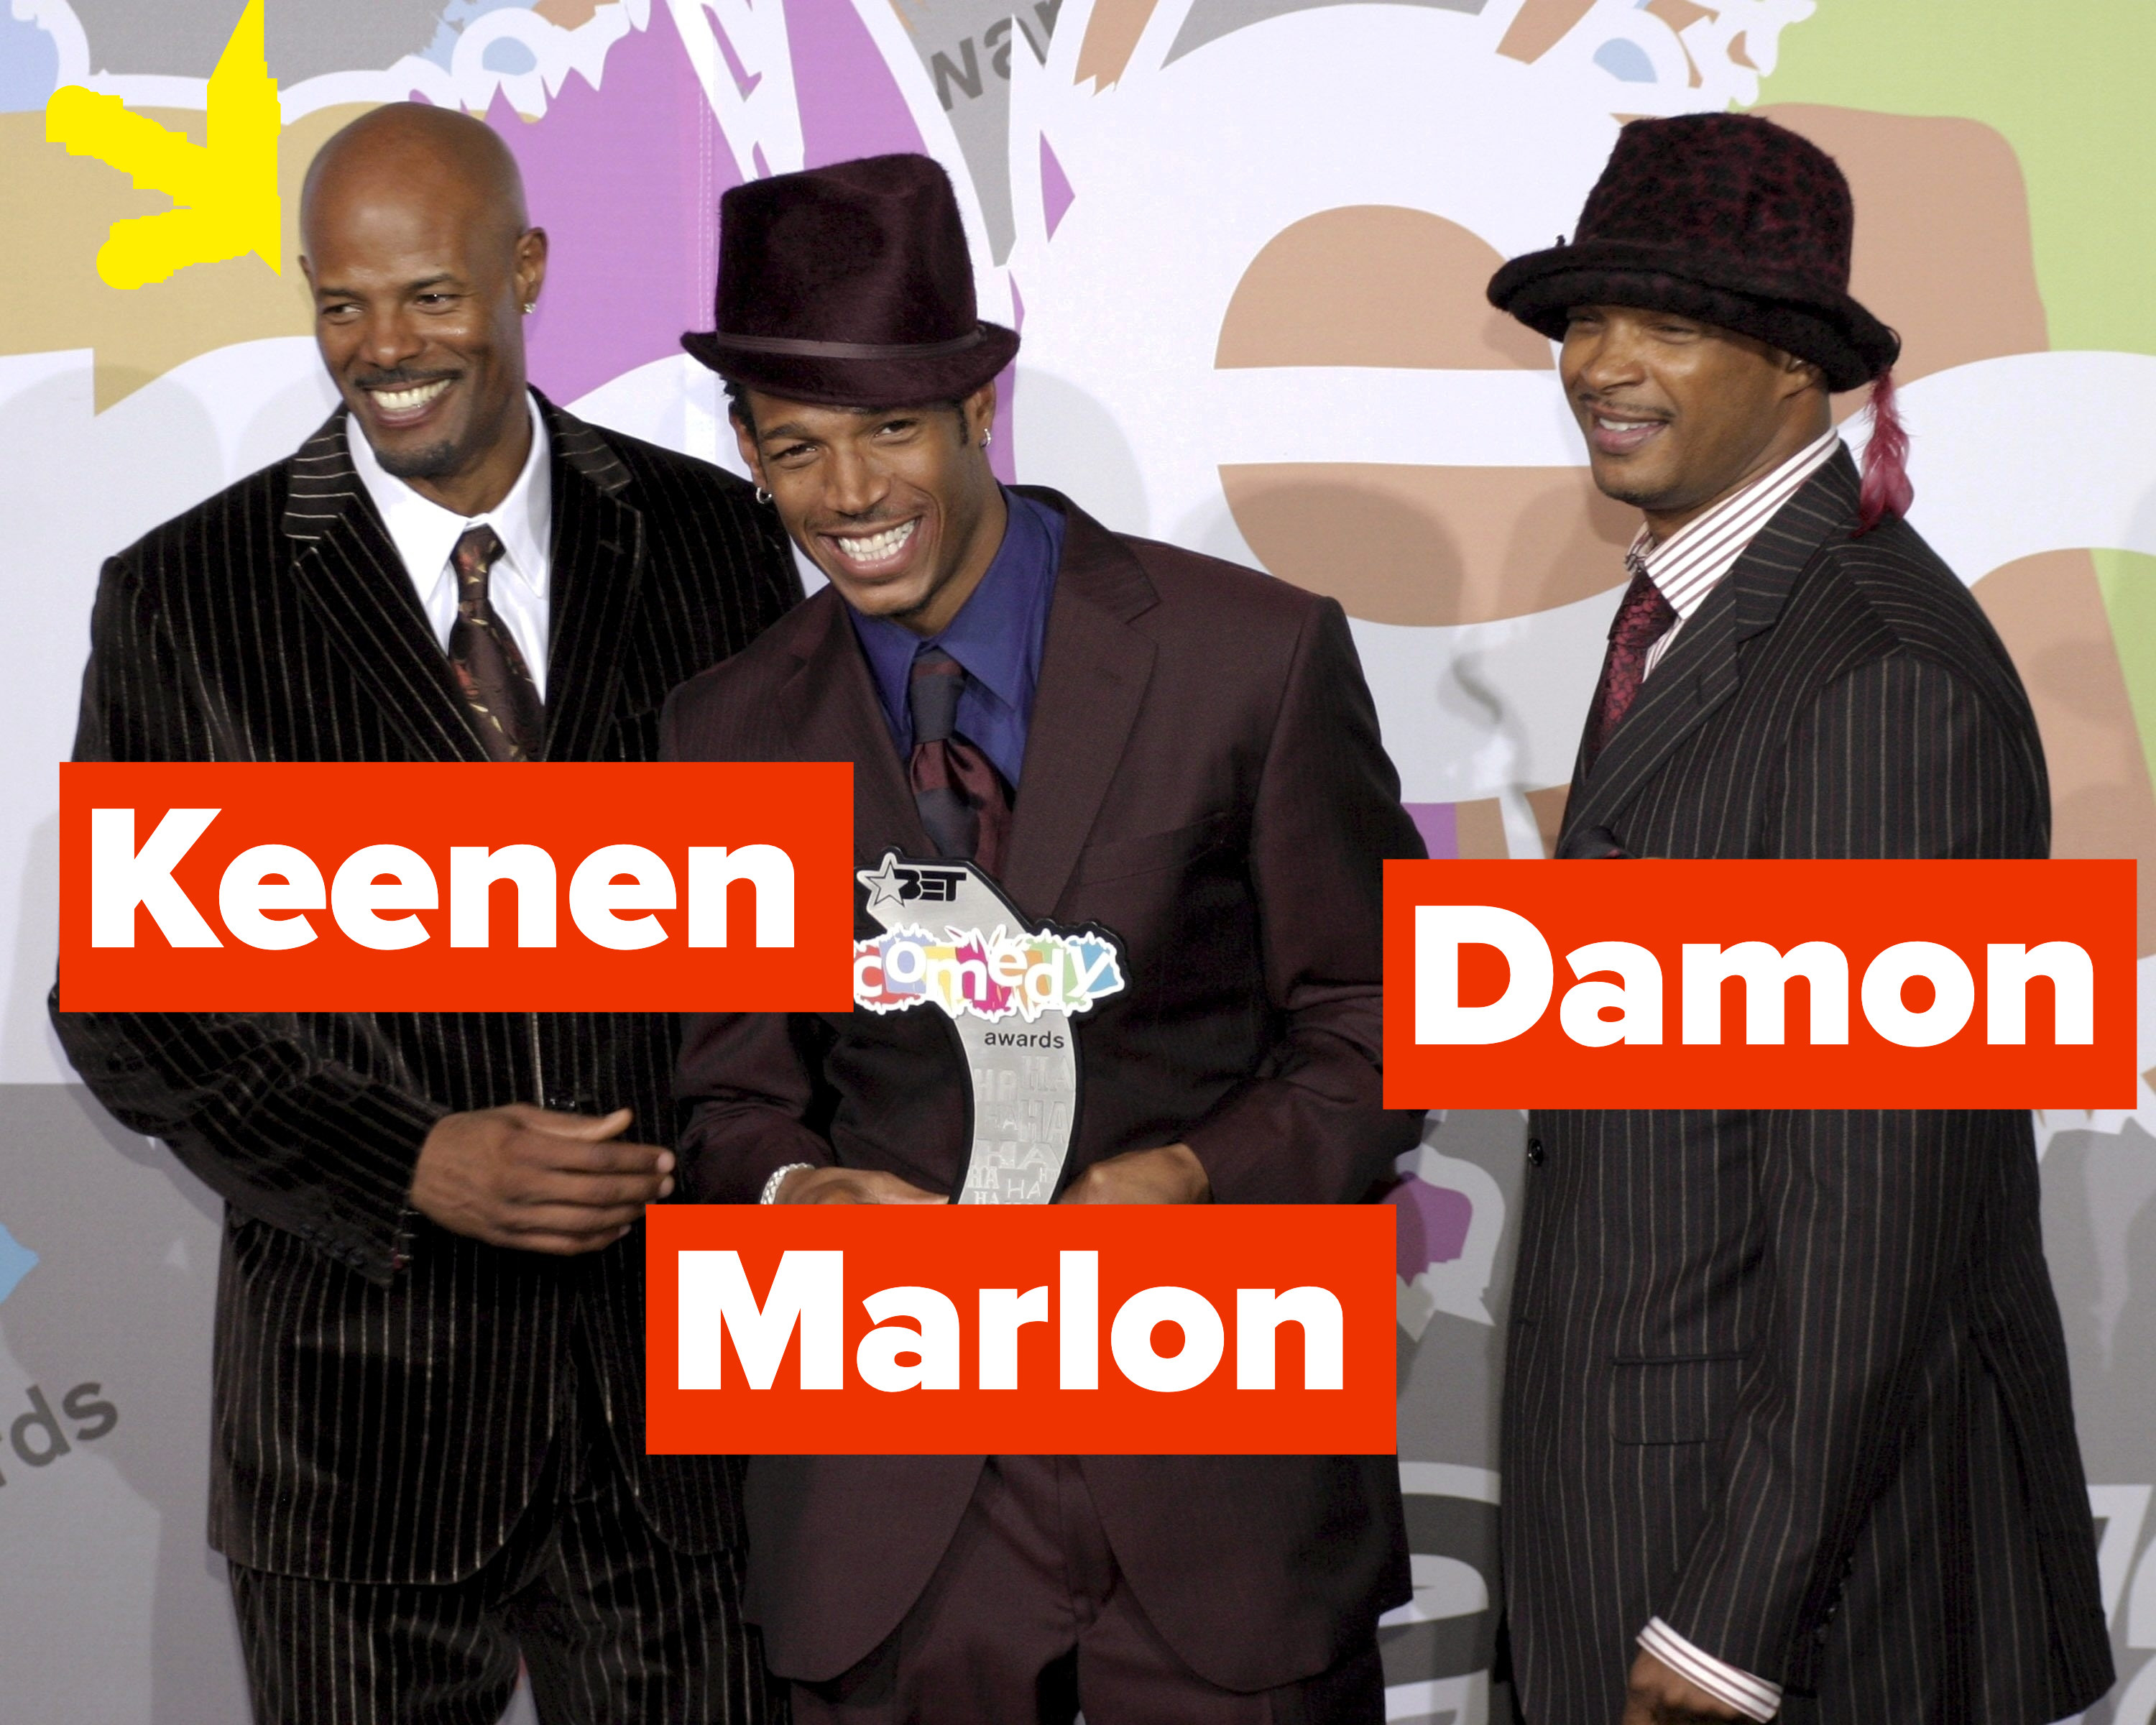 Keenen, Marlon, and Damon Wayans post for a picture wearing suits